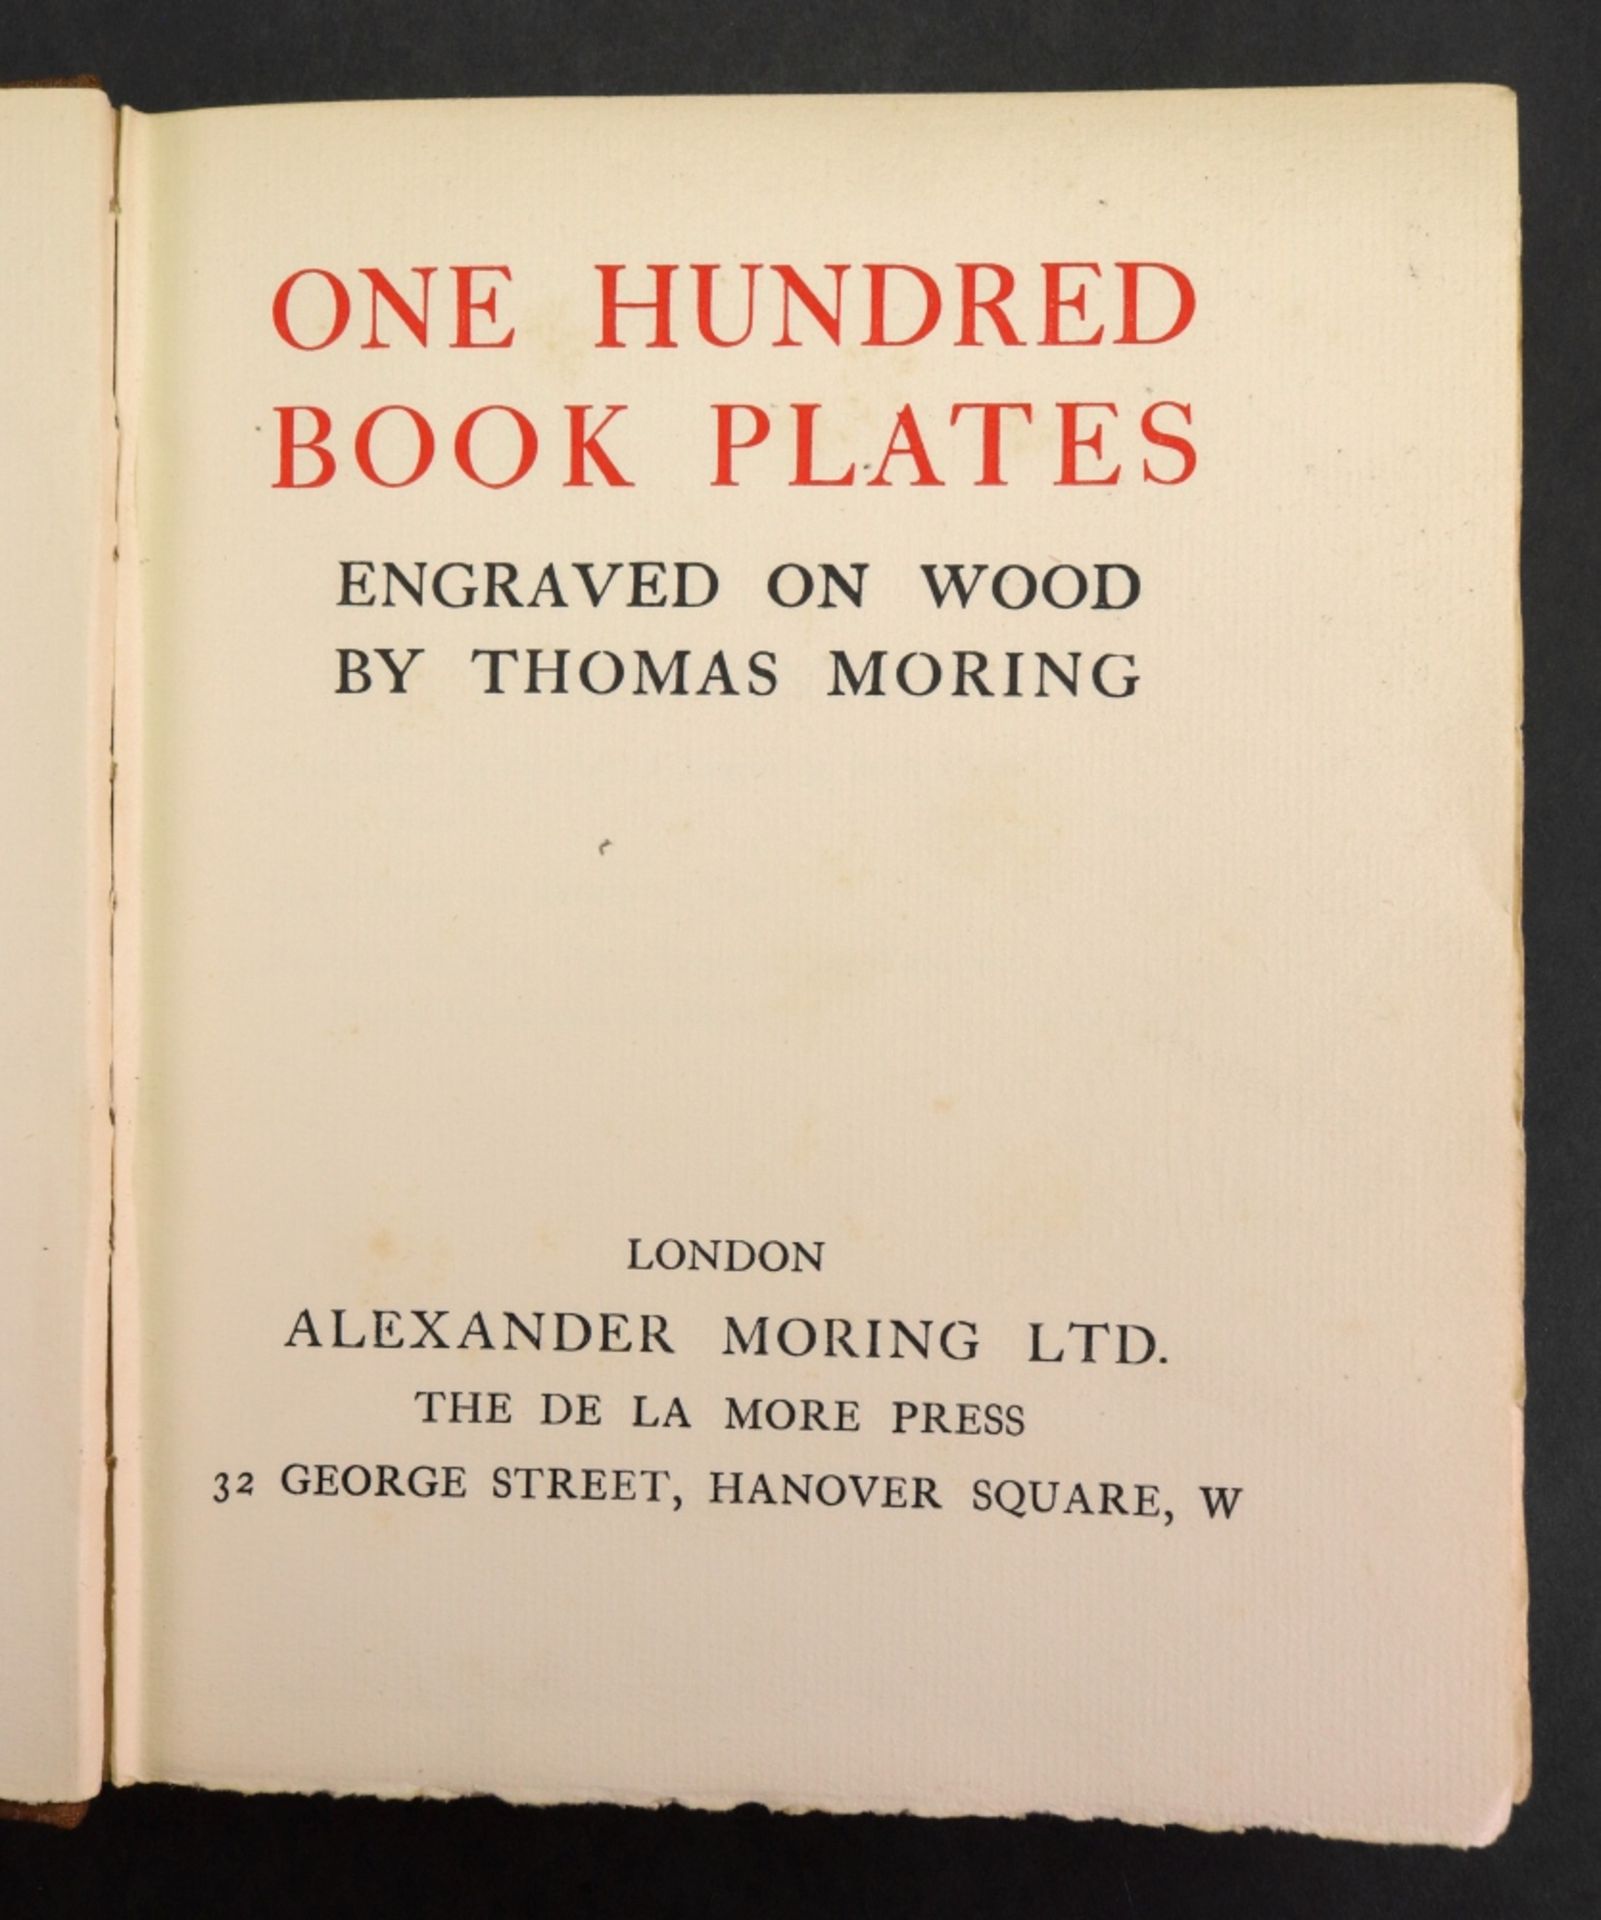 MORING (Thomas) One Hundred Book Plates, engraved on wood, The De La More Press, n.d.